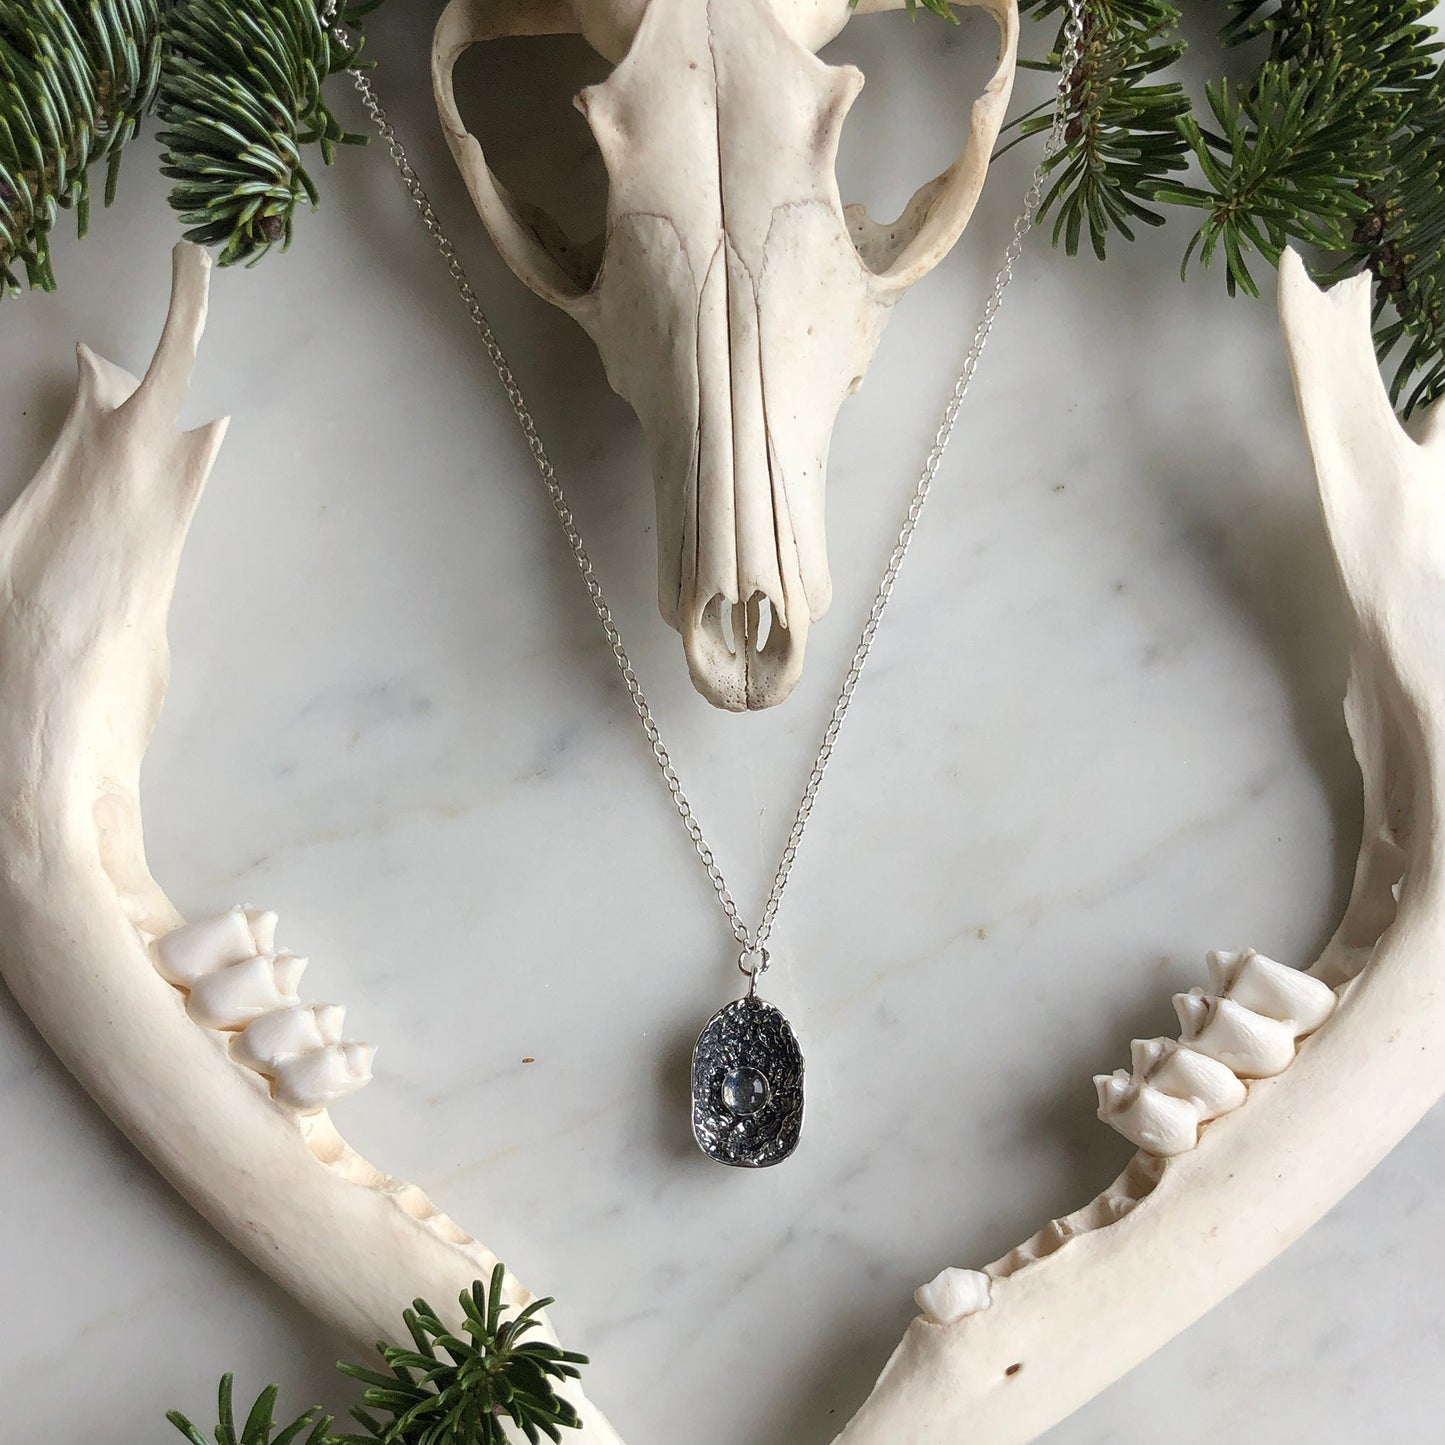 deer vertebral epiphysis necklace (7/8" cupped) with labradorite